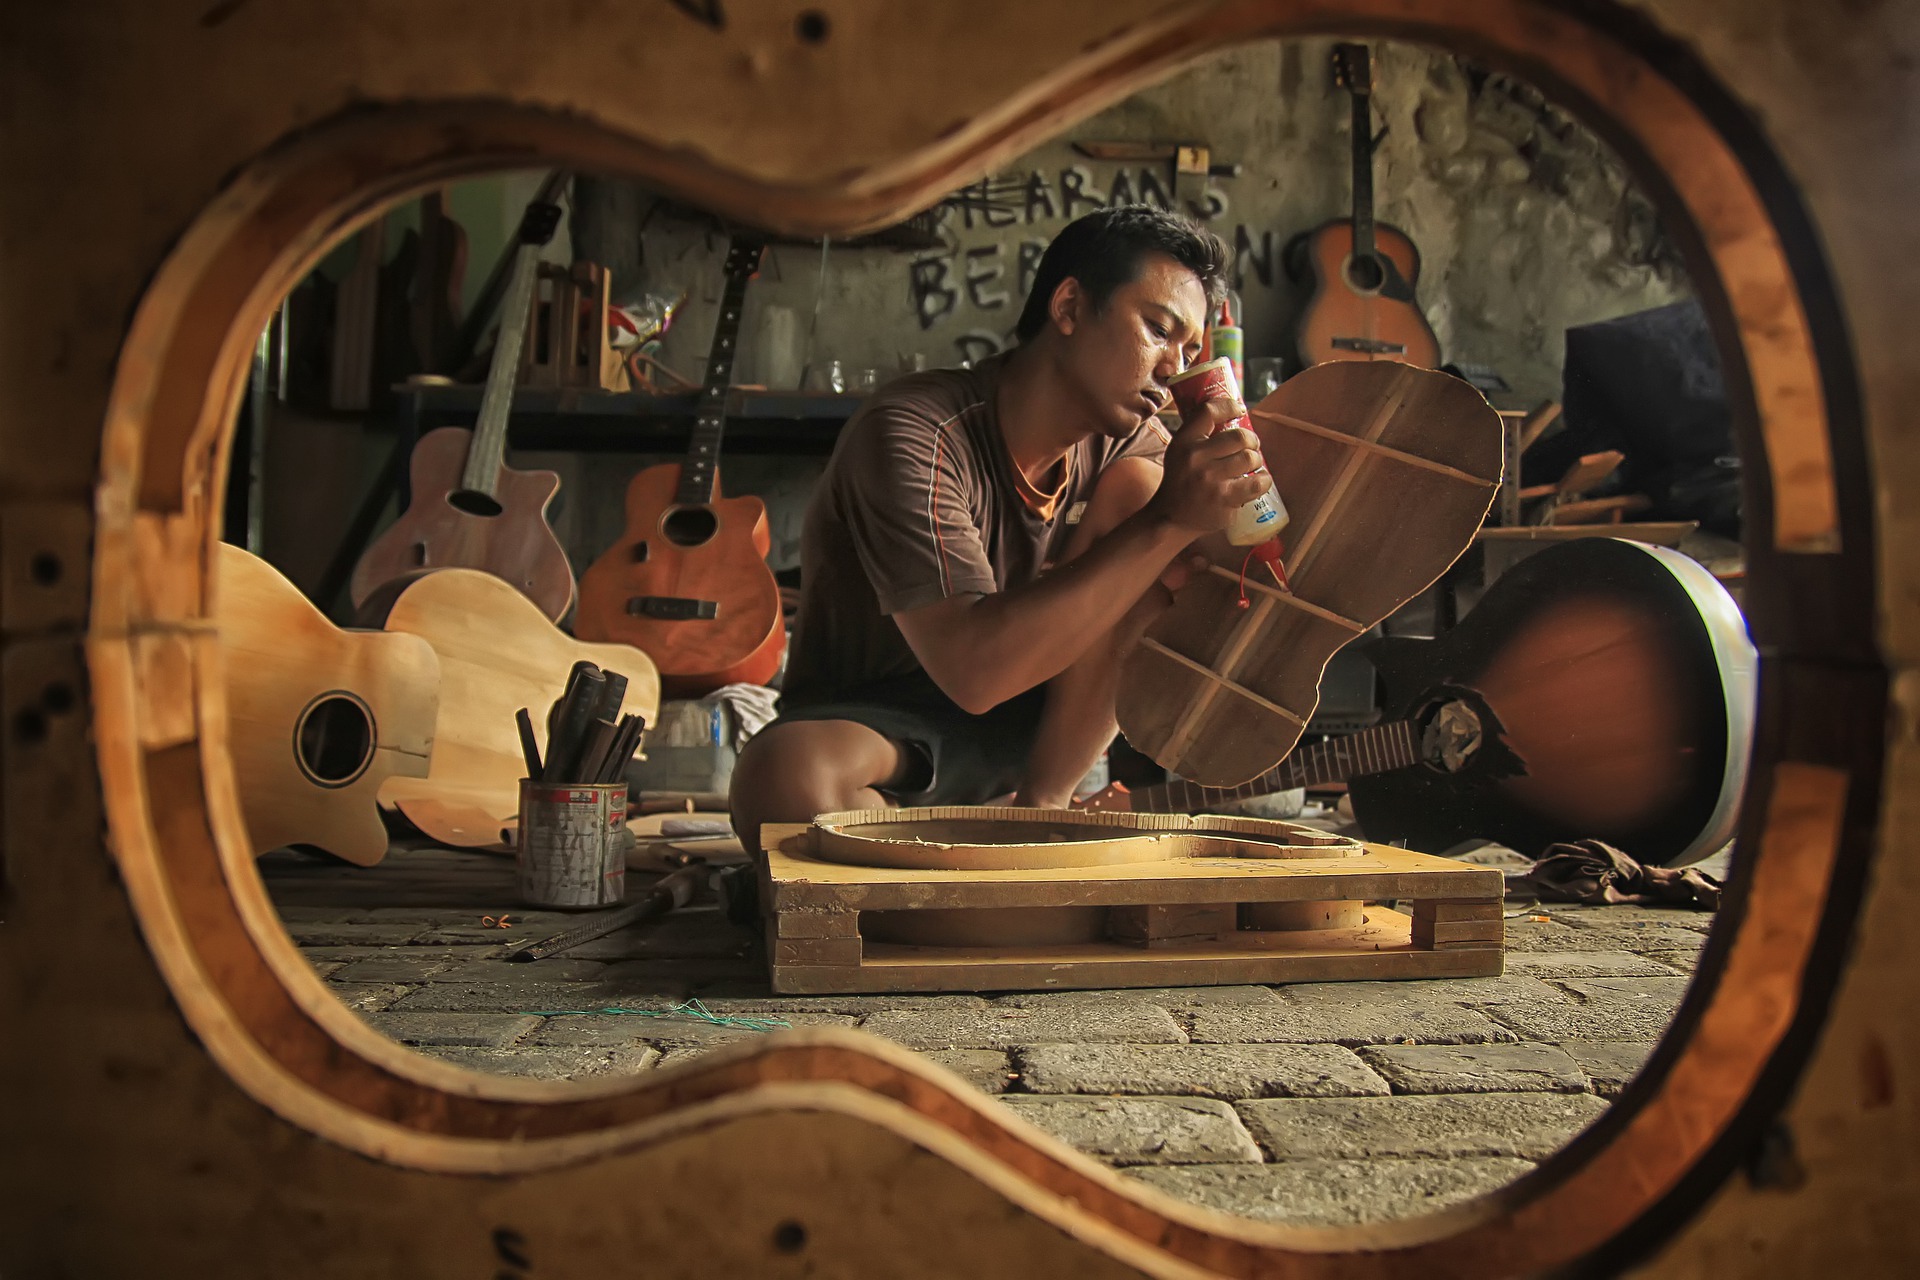 A man working on a hand-made guitar